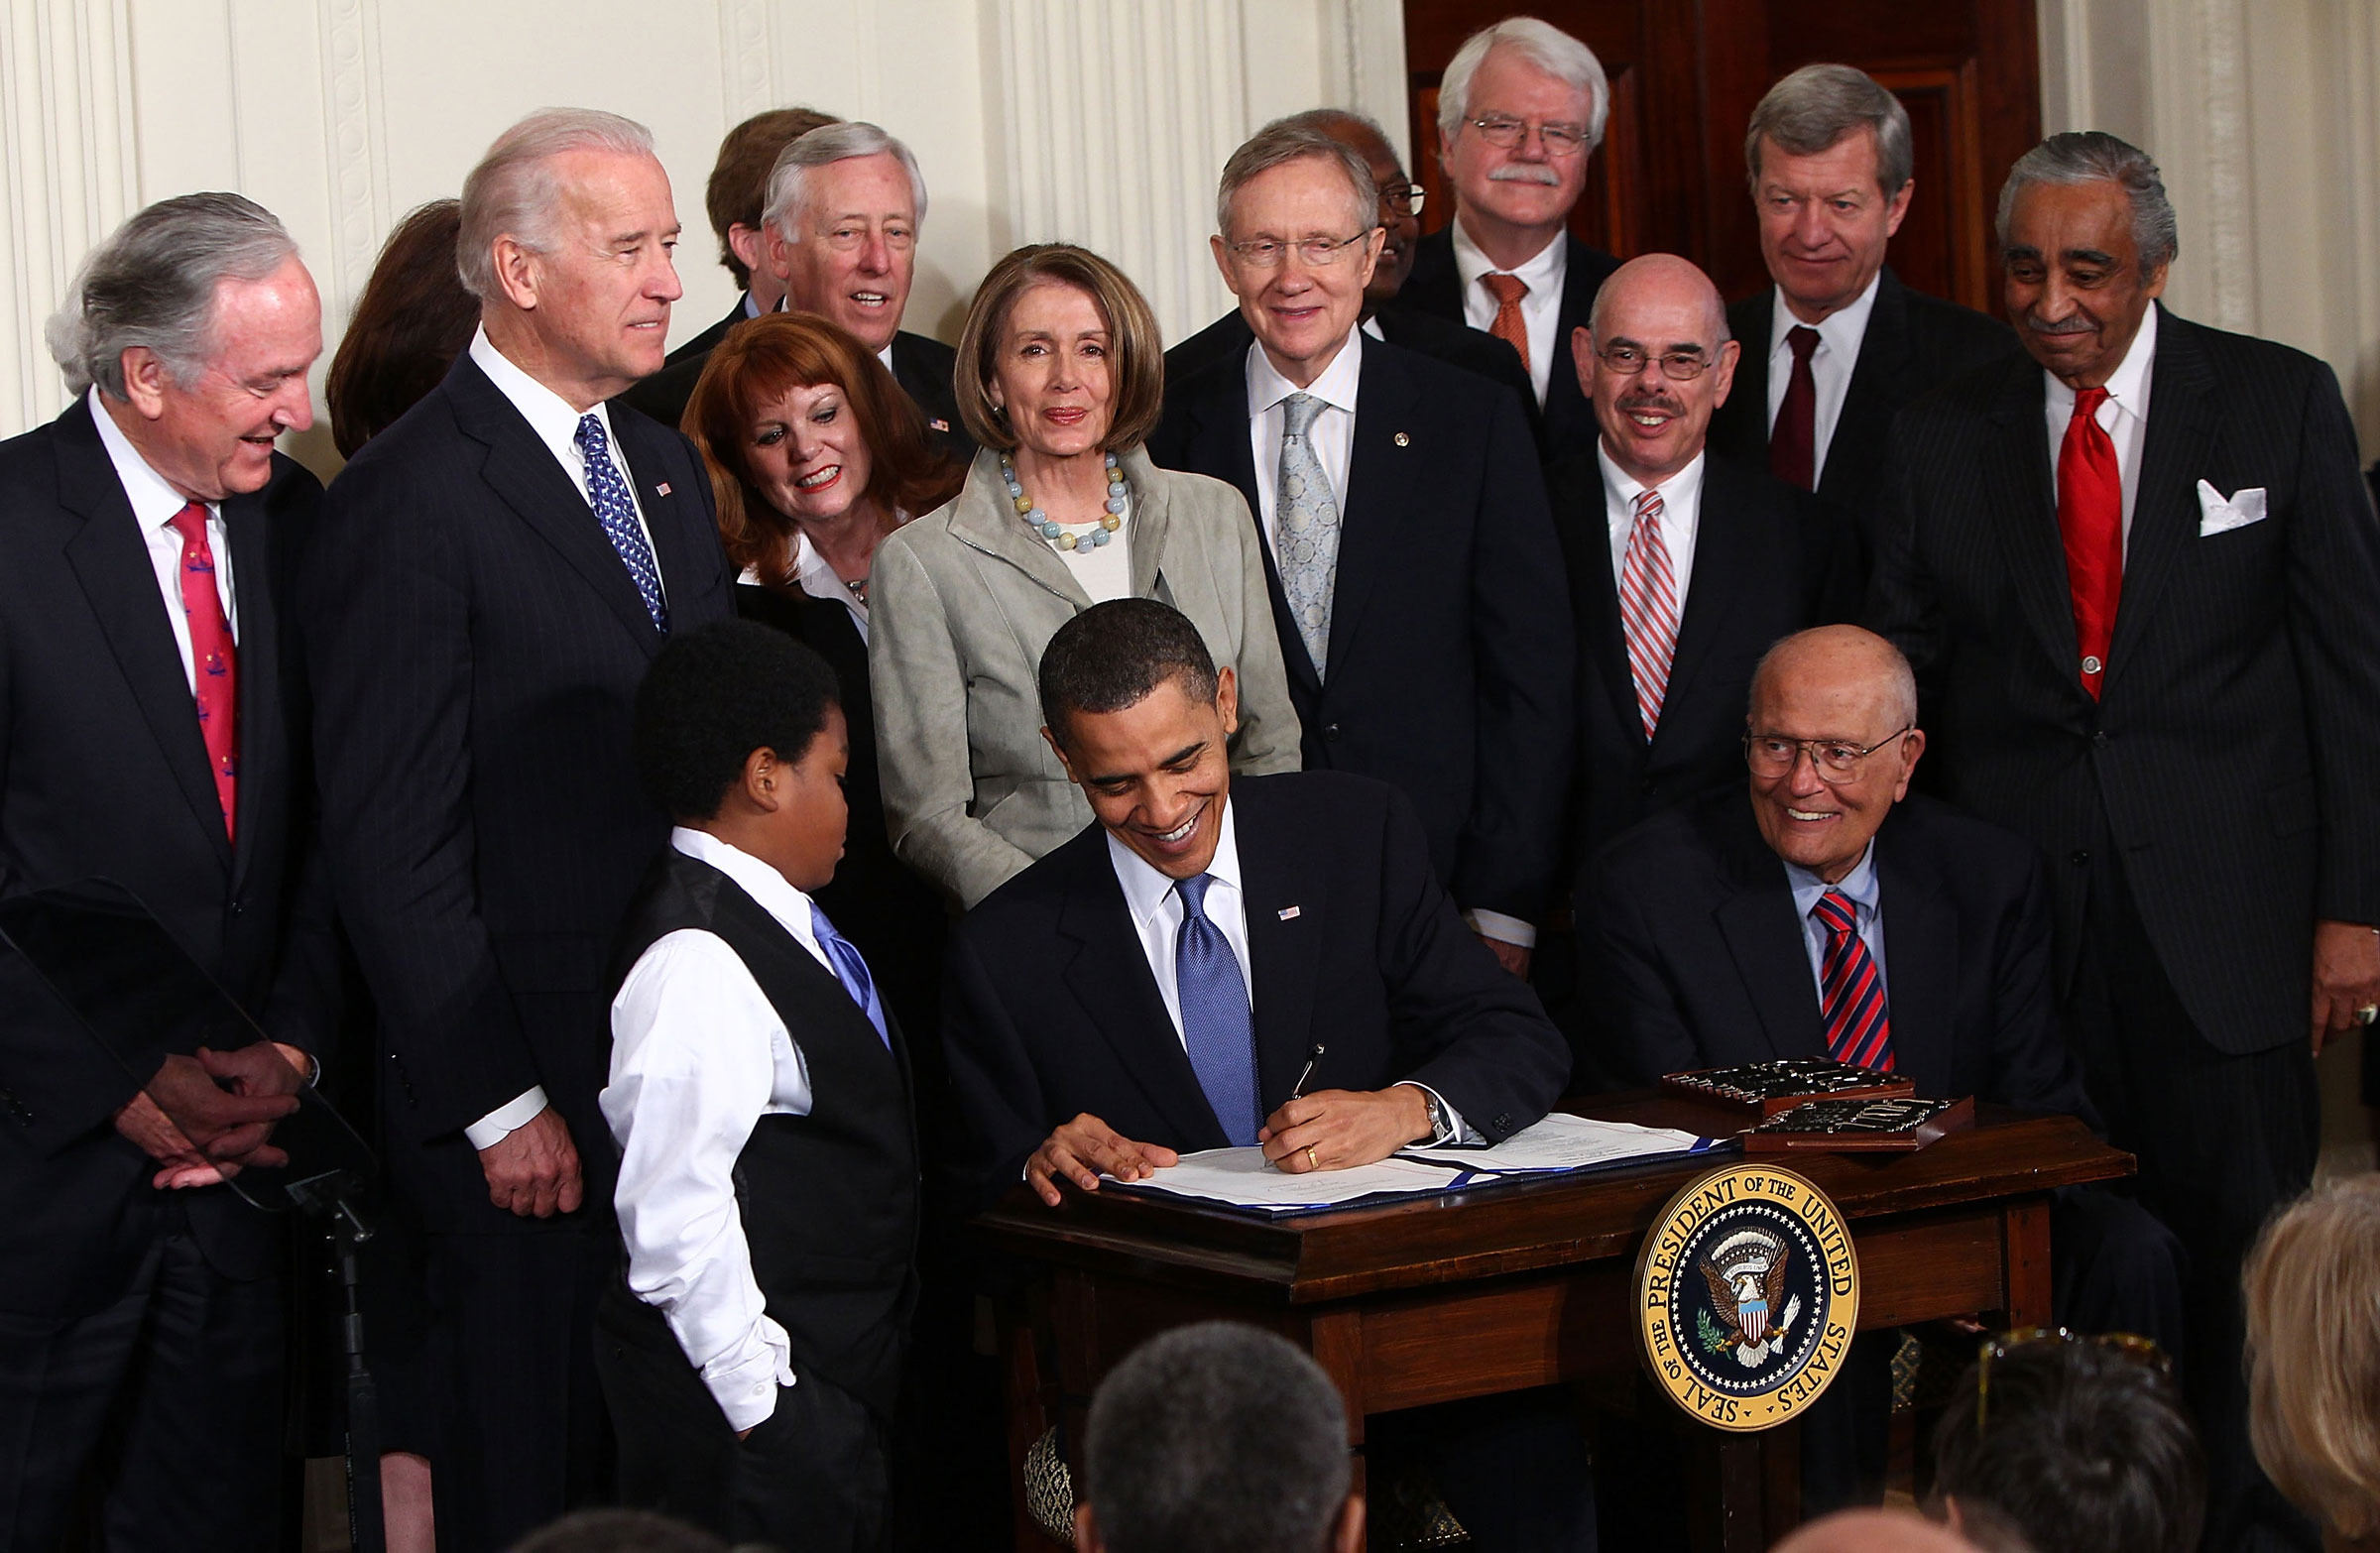 Speaker of the House Nancy Pelosi stands behind President Barack Obama as he signs the Affordable Health Care for America Act during a ceremony with fellow Democrats in the East Room of the White House on March 23, 2010.